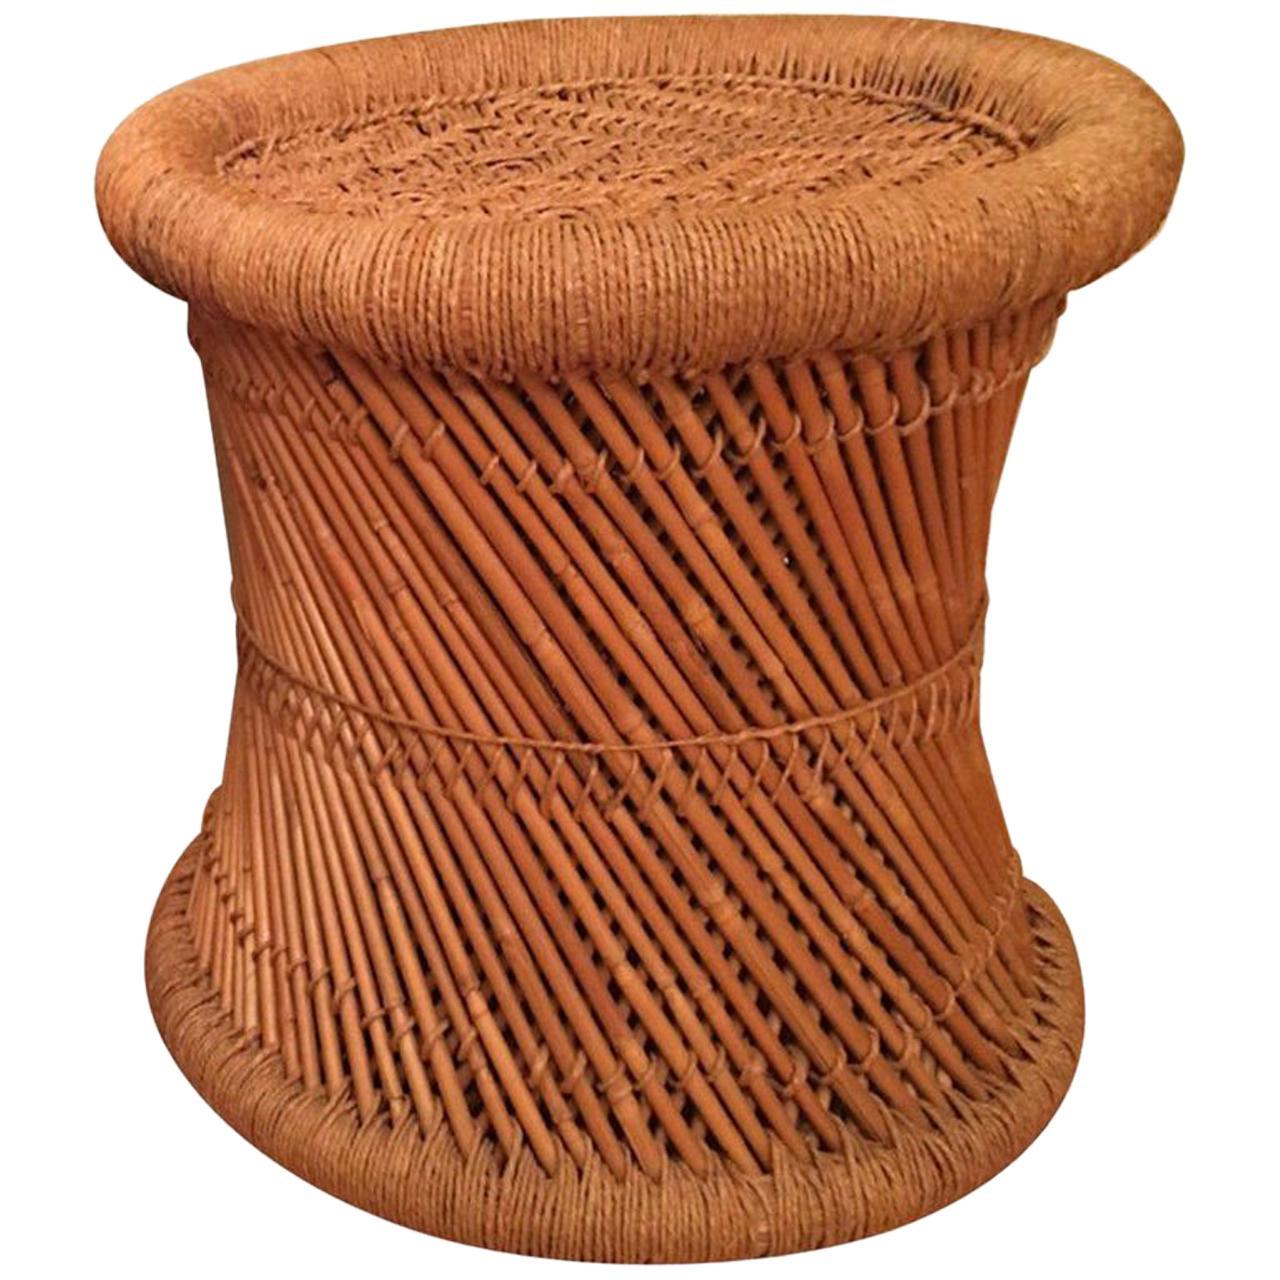 Midcentury California Modern Reed and Rush Stool For Sale